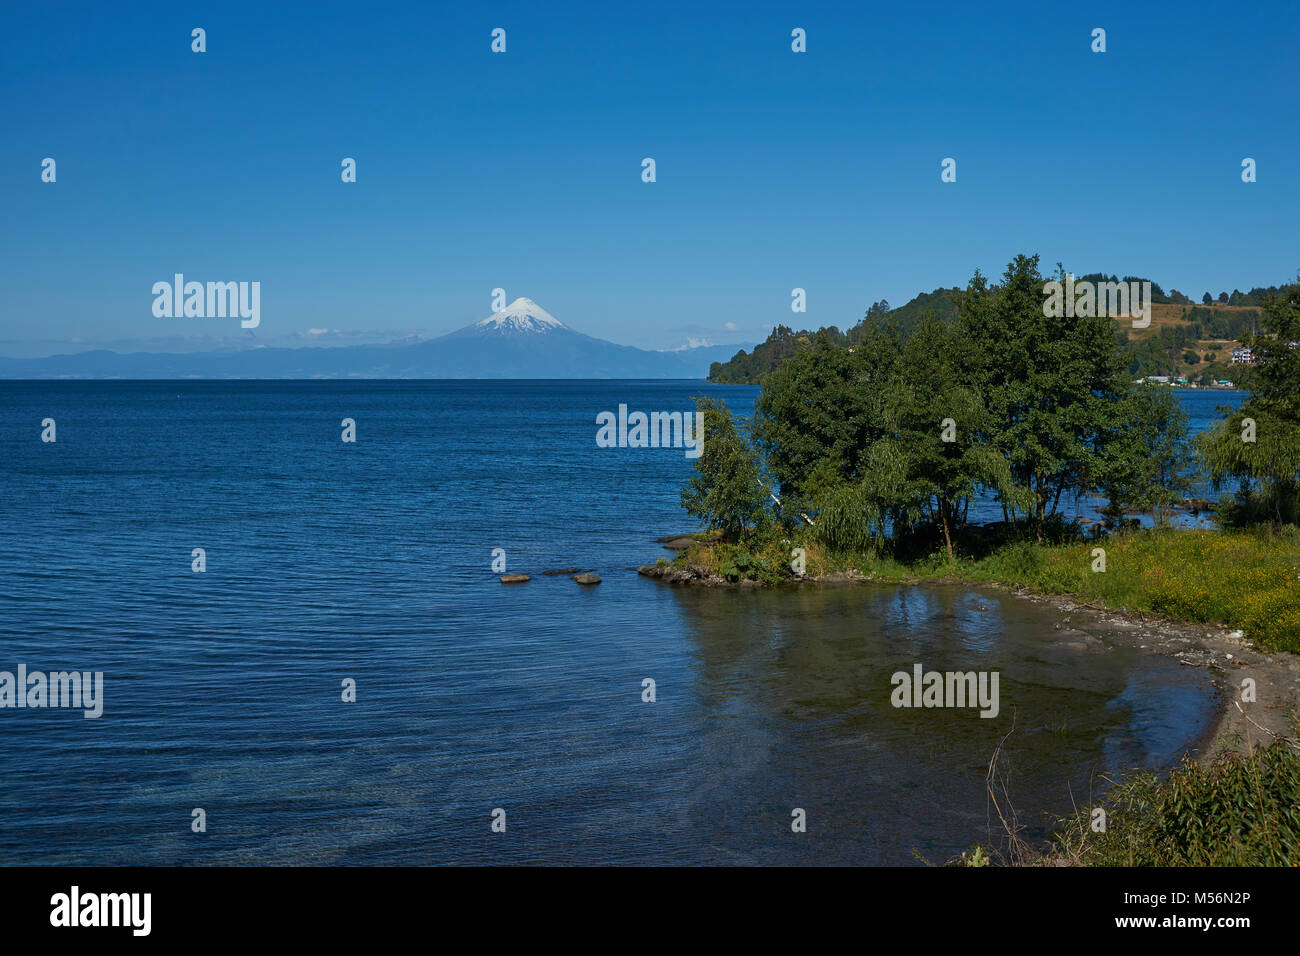 Snow capped Volcano Osorno (2,652 metres) on the edge of Llanquihue Lake in Southern Chile. Viewed from Frutillar. Stock Photo